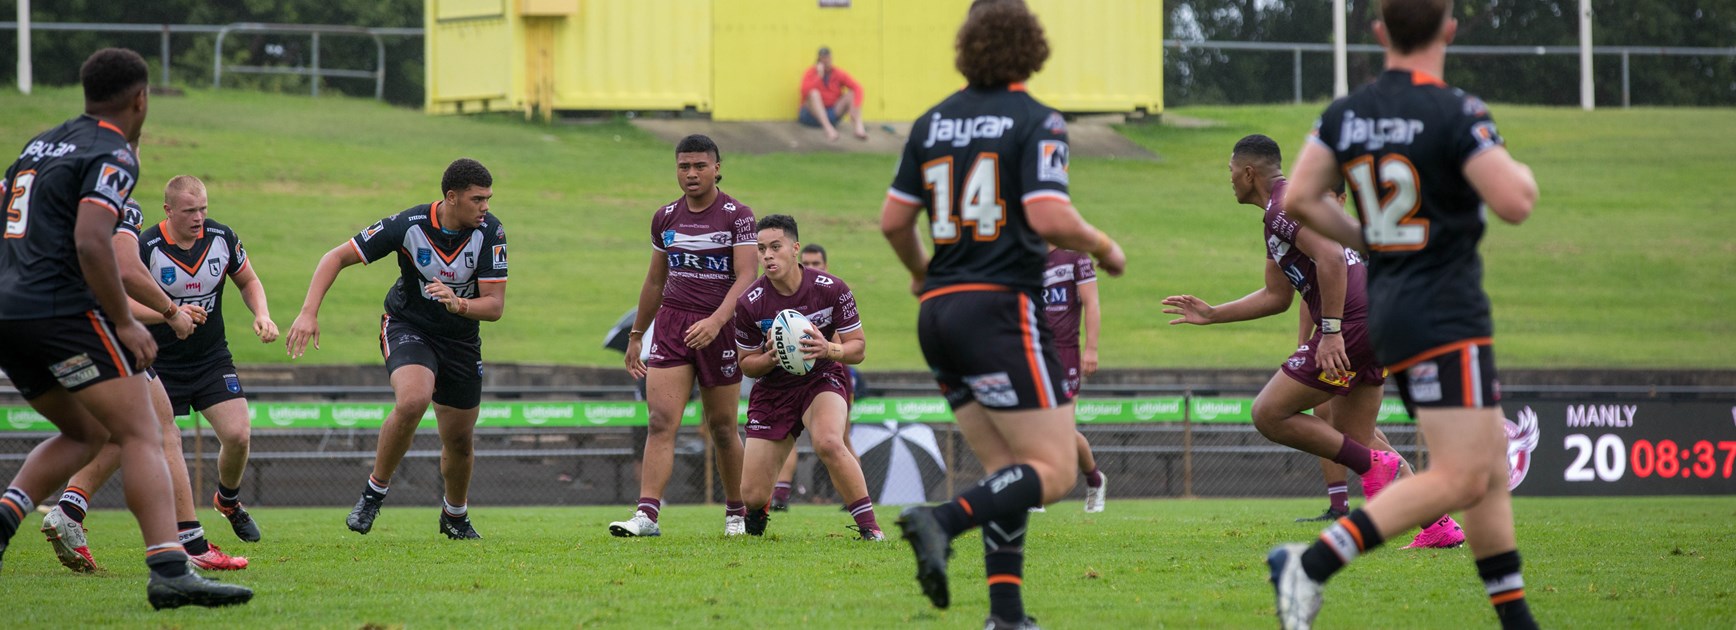 Sea Eagles fight hard to beat Magpies at Lottoland